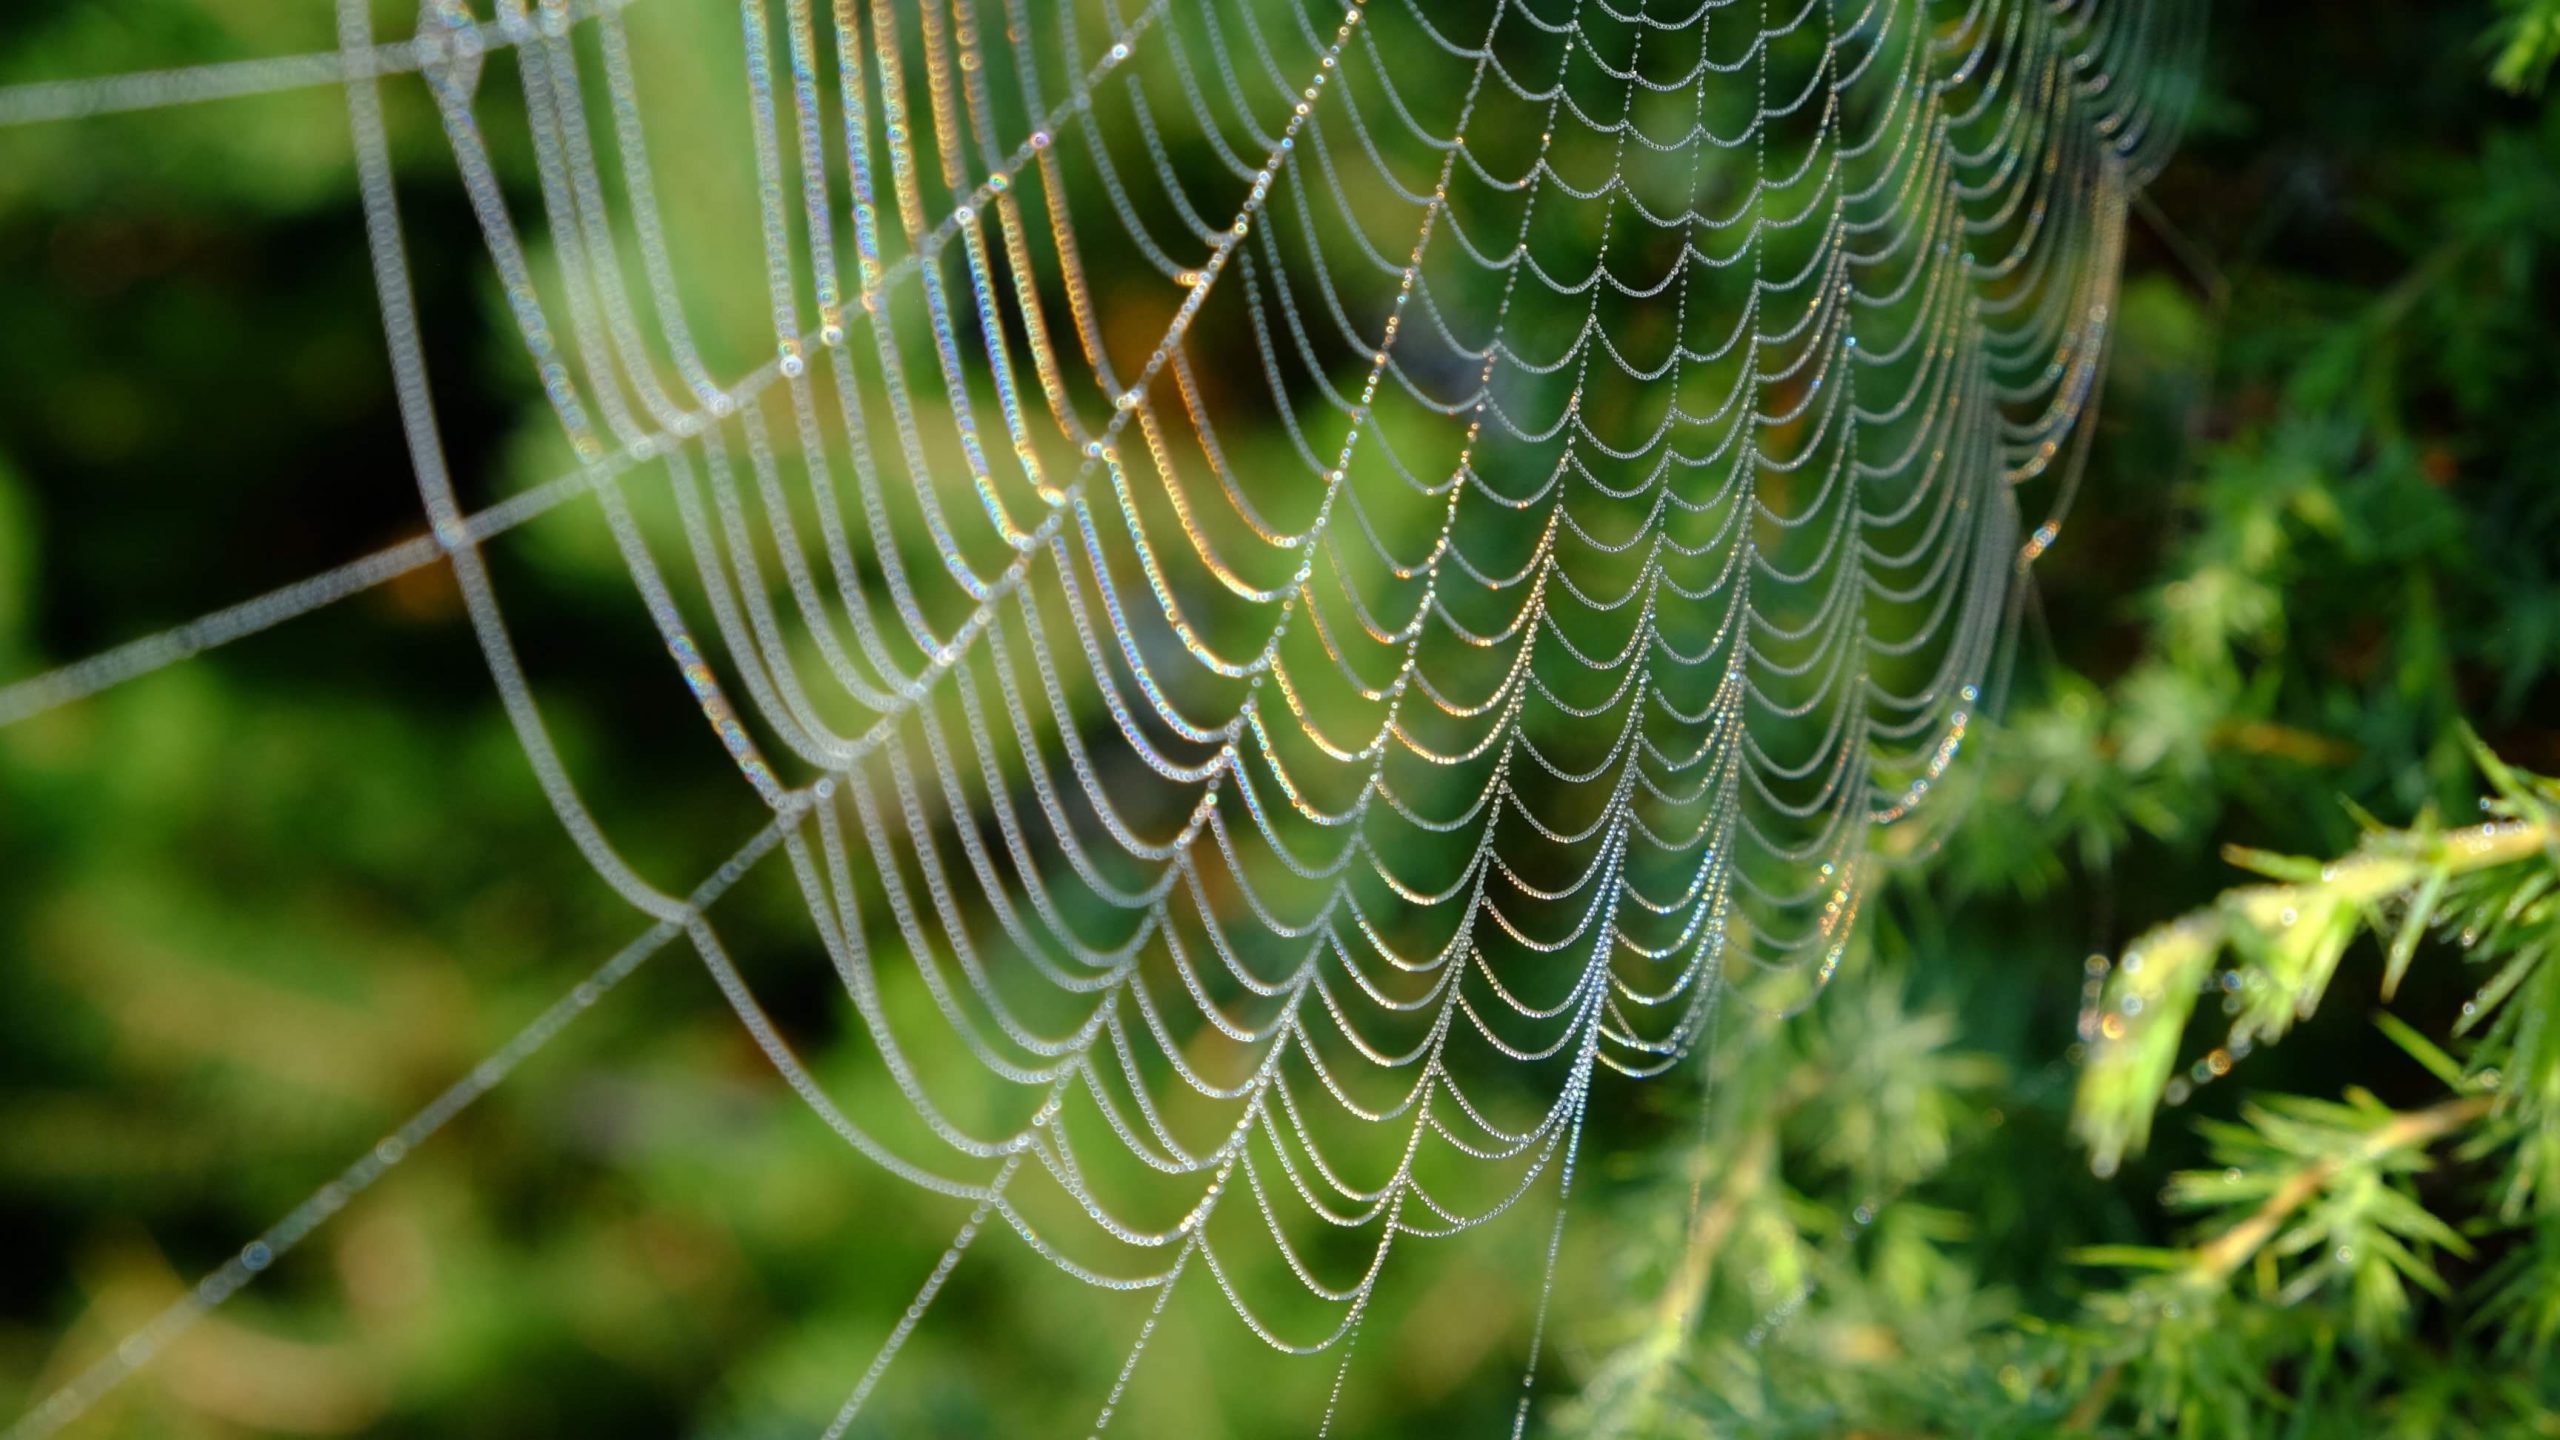 An image of a spider web against a green leafy background